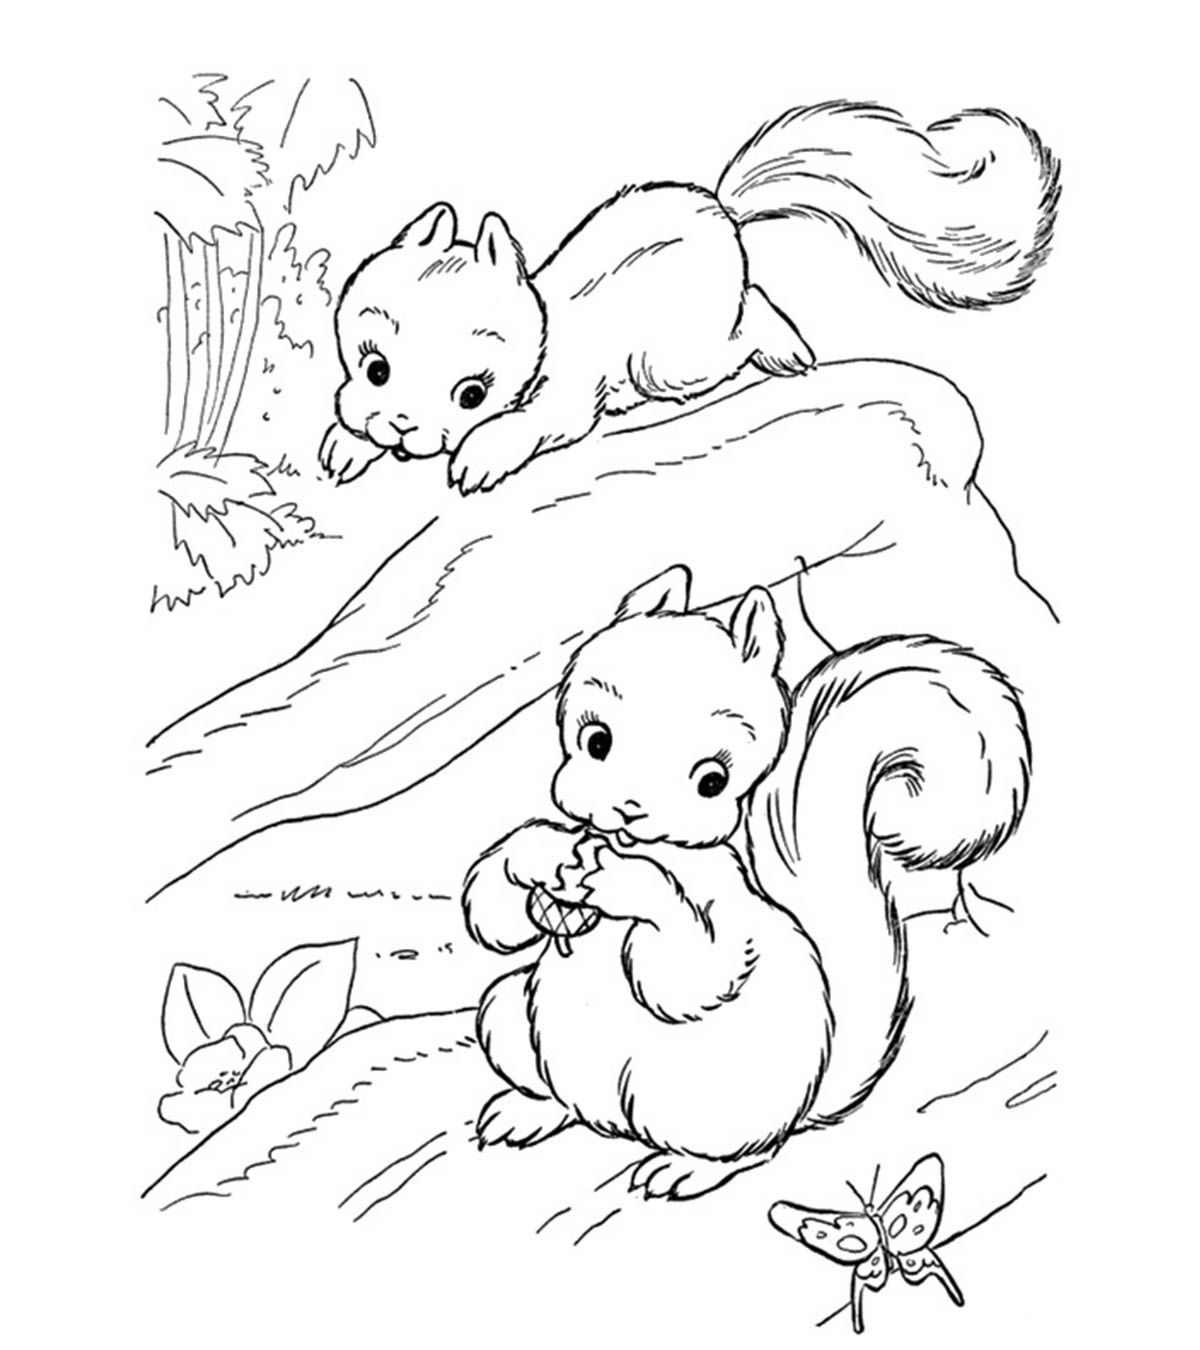 25 Interesting Squirrel Coloring Pages To Keep Your Child Busy_image